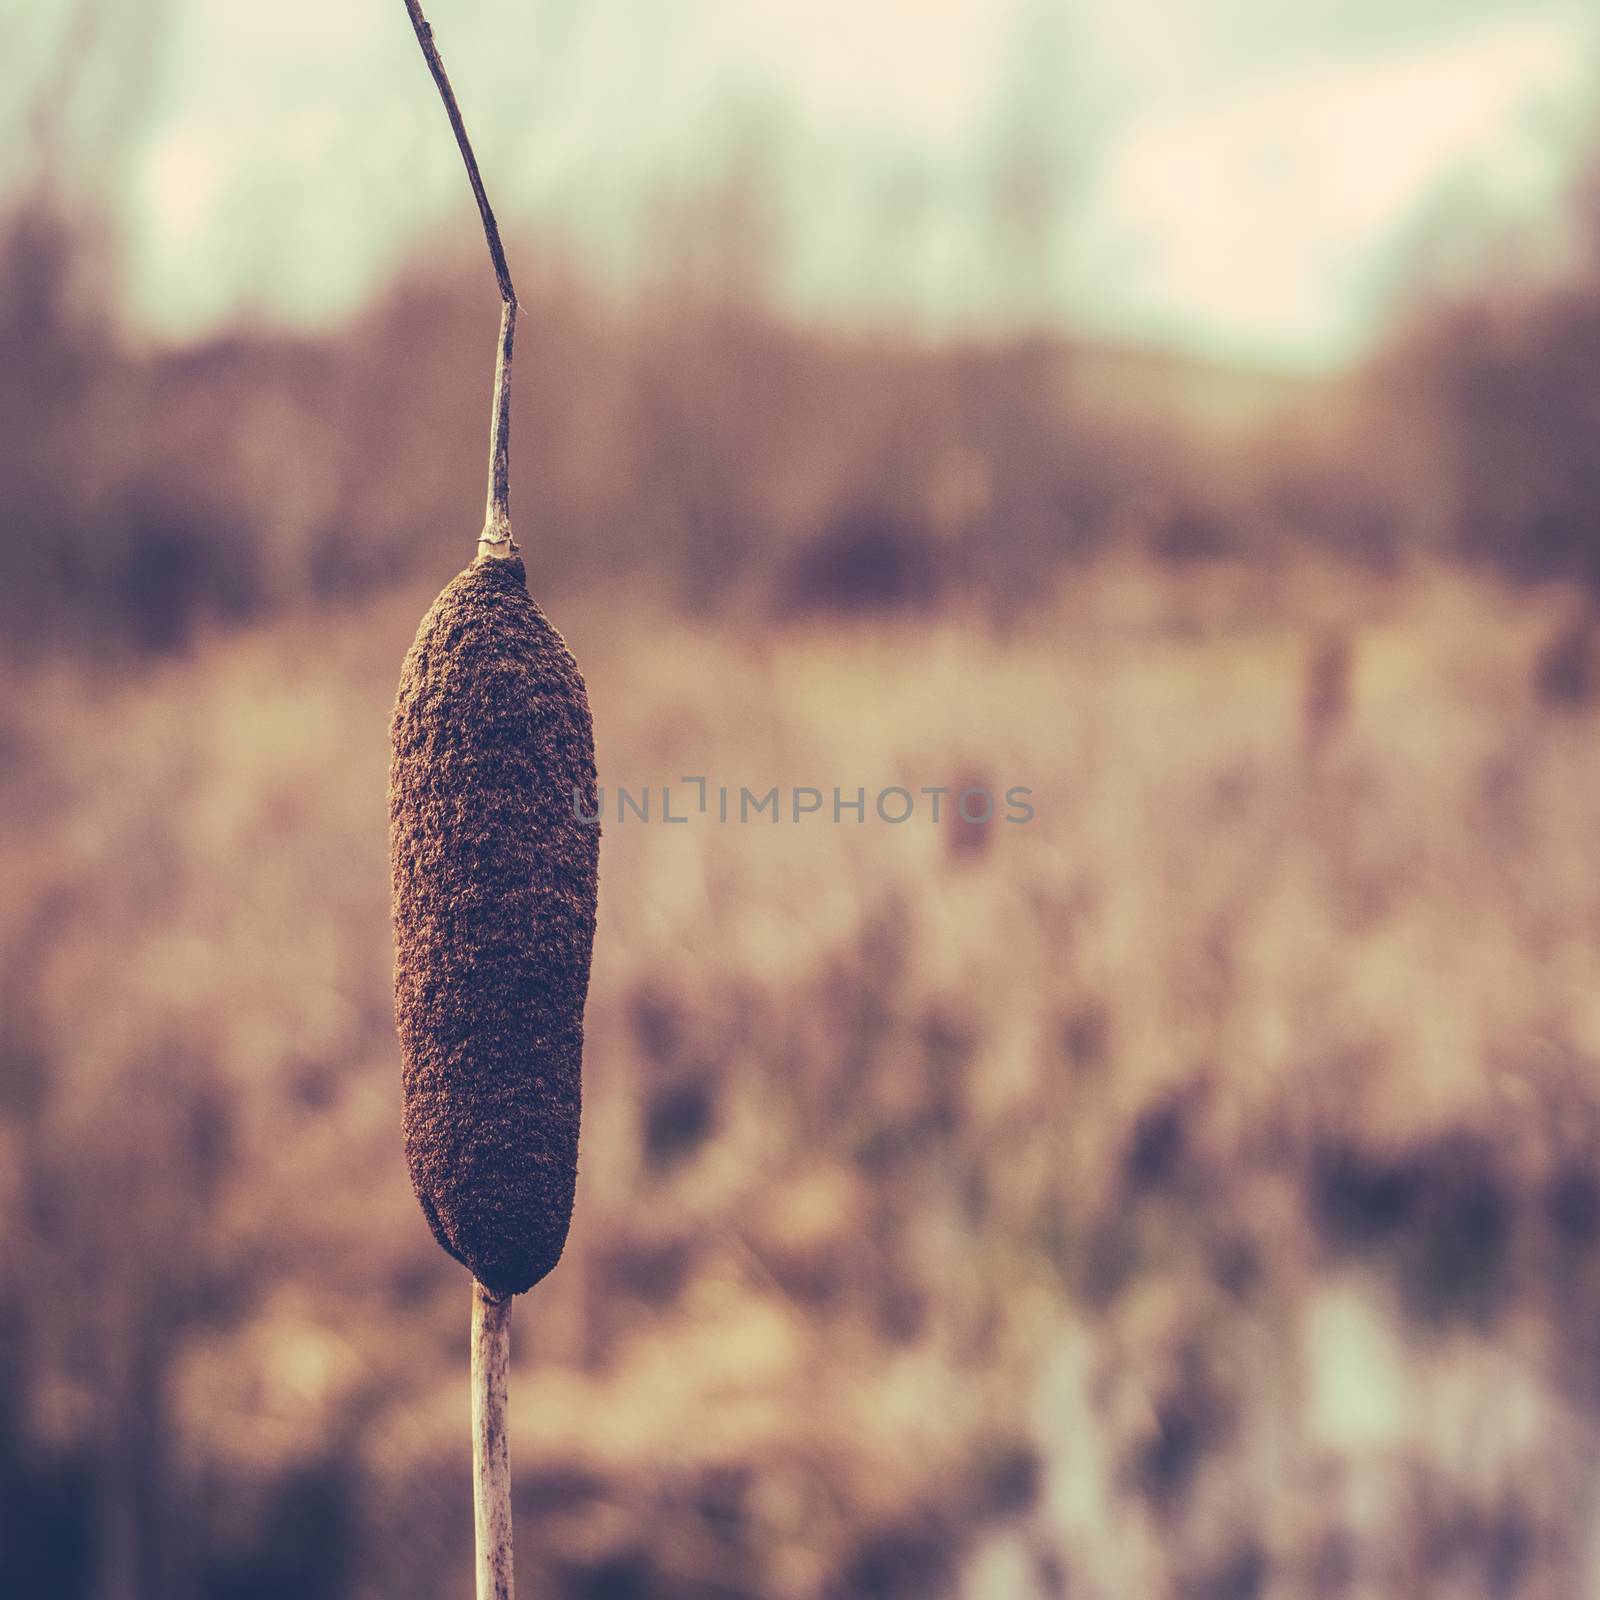 Retro Style Winter Image Of A Single Bulrush Or Cattail In A Wetland With Copy Space